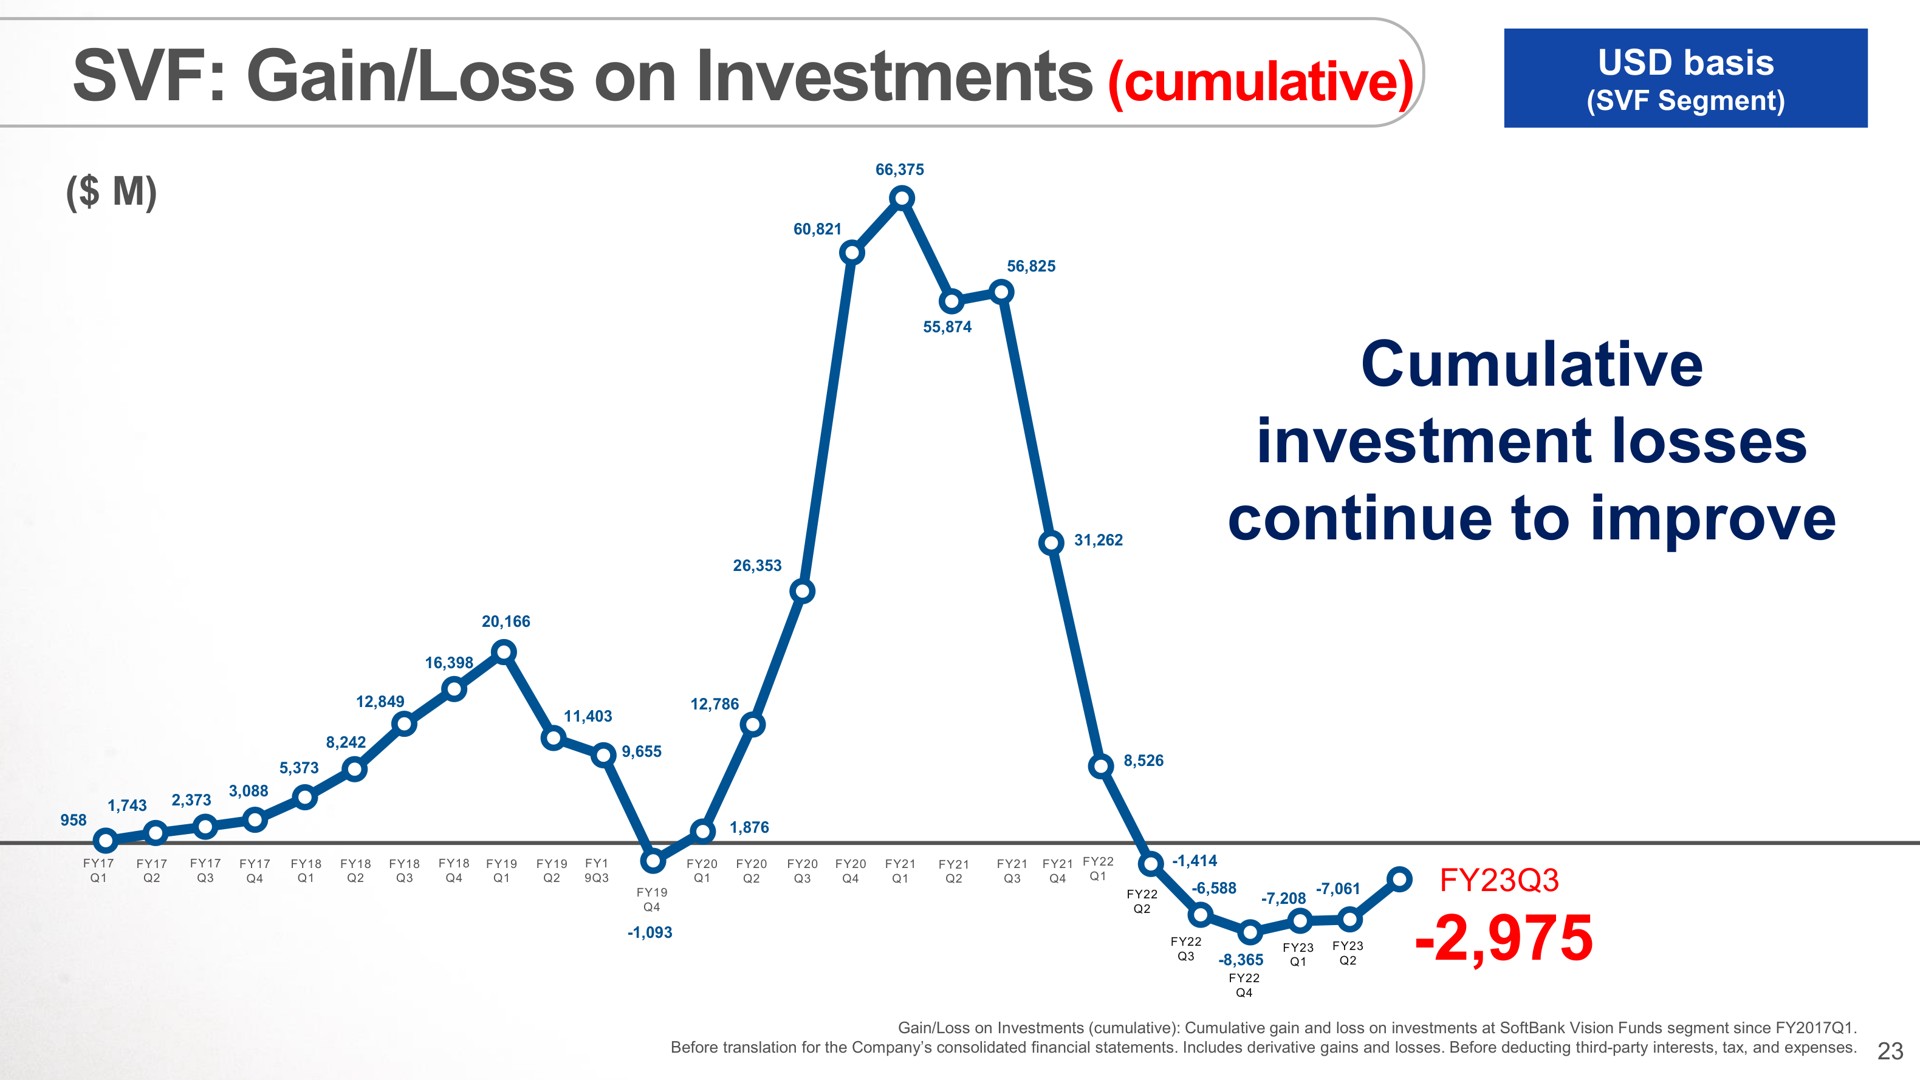 gain loss on investments cumulative cumulative investment losses continue to improve | SoftBank